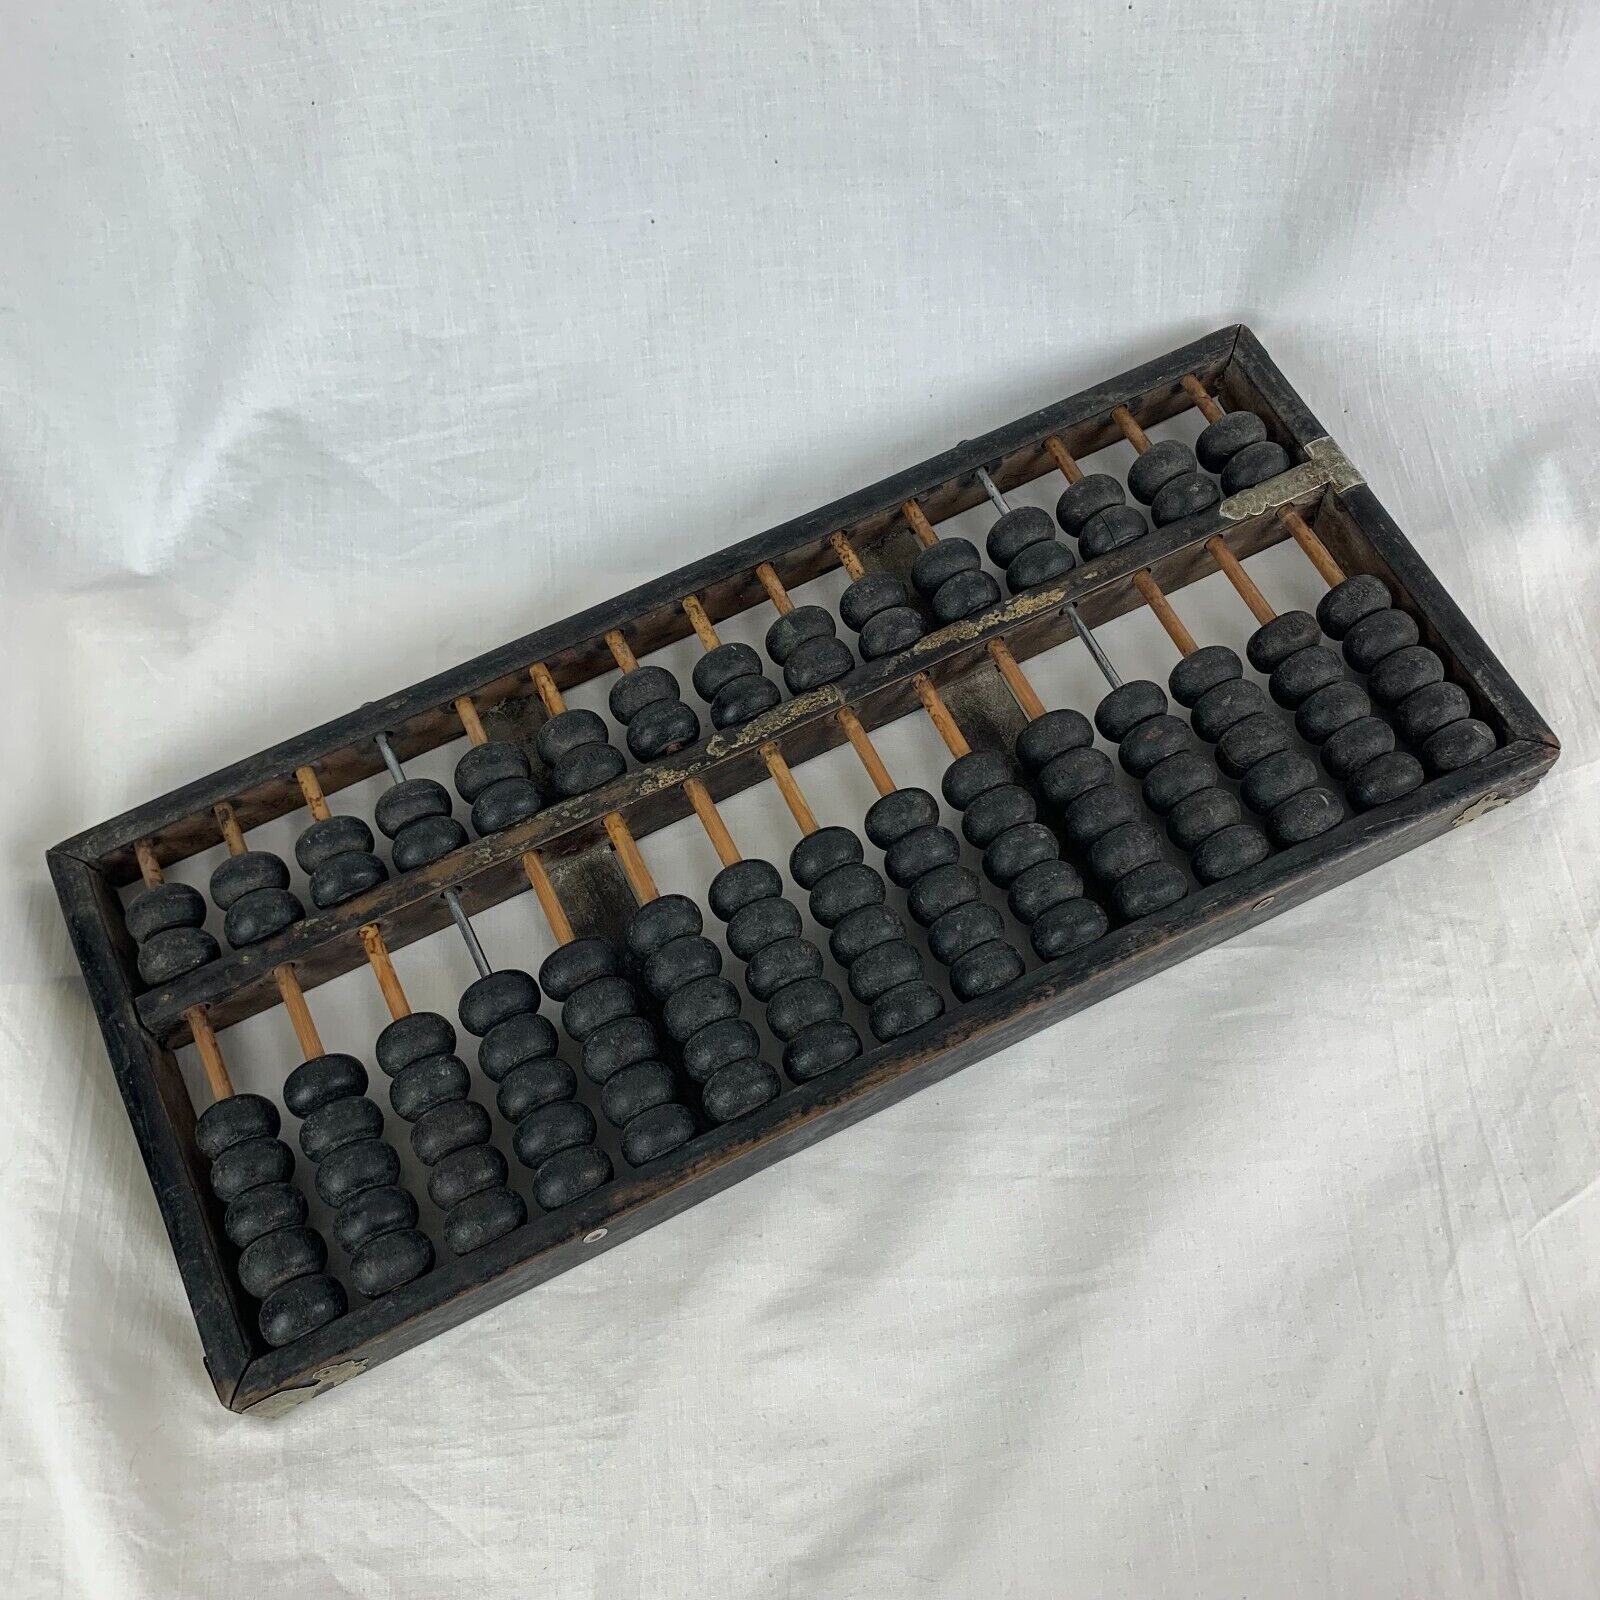 Vintage Chinese Abacus from China in Use Pre-1970 Wooden 15 Post 98 Beads